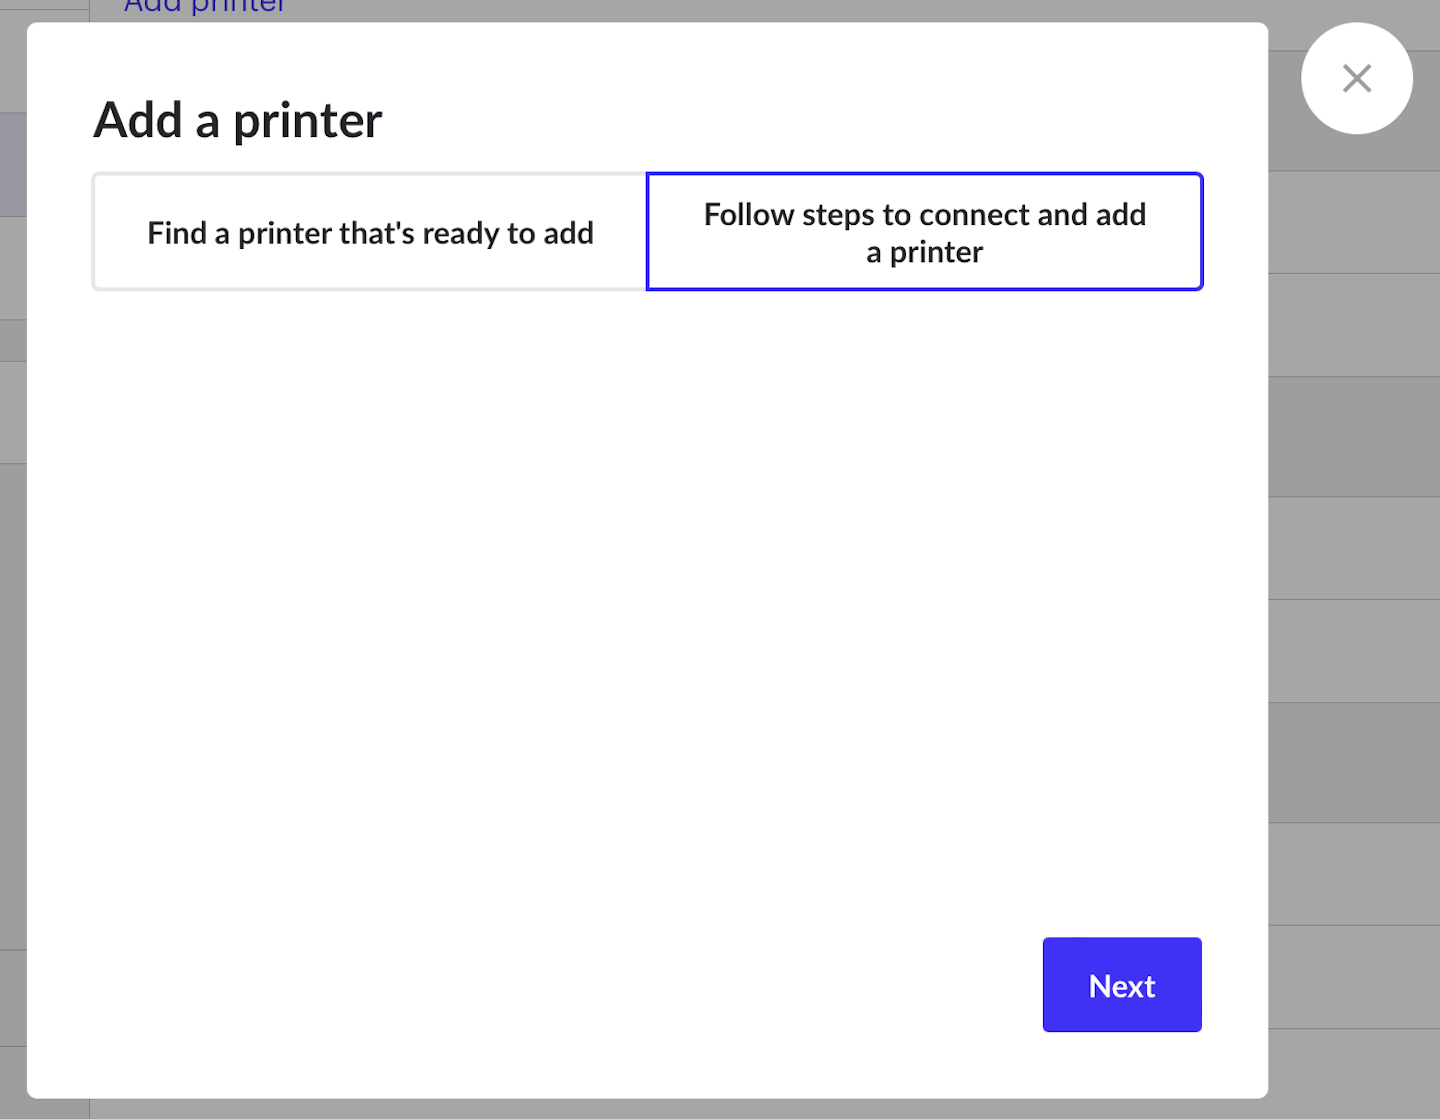 Pop-up with options to Find a printer that's ready to add or Follow steps to connect and add a printer, with Follow steps to connect and add a printer option selected.